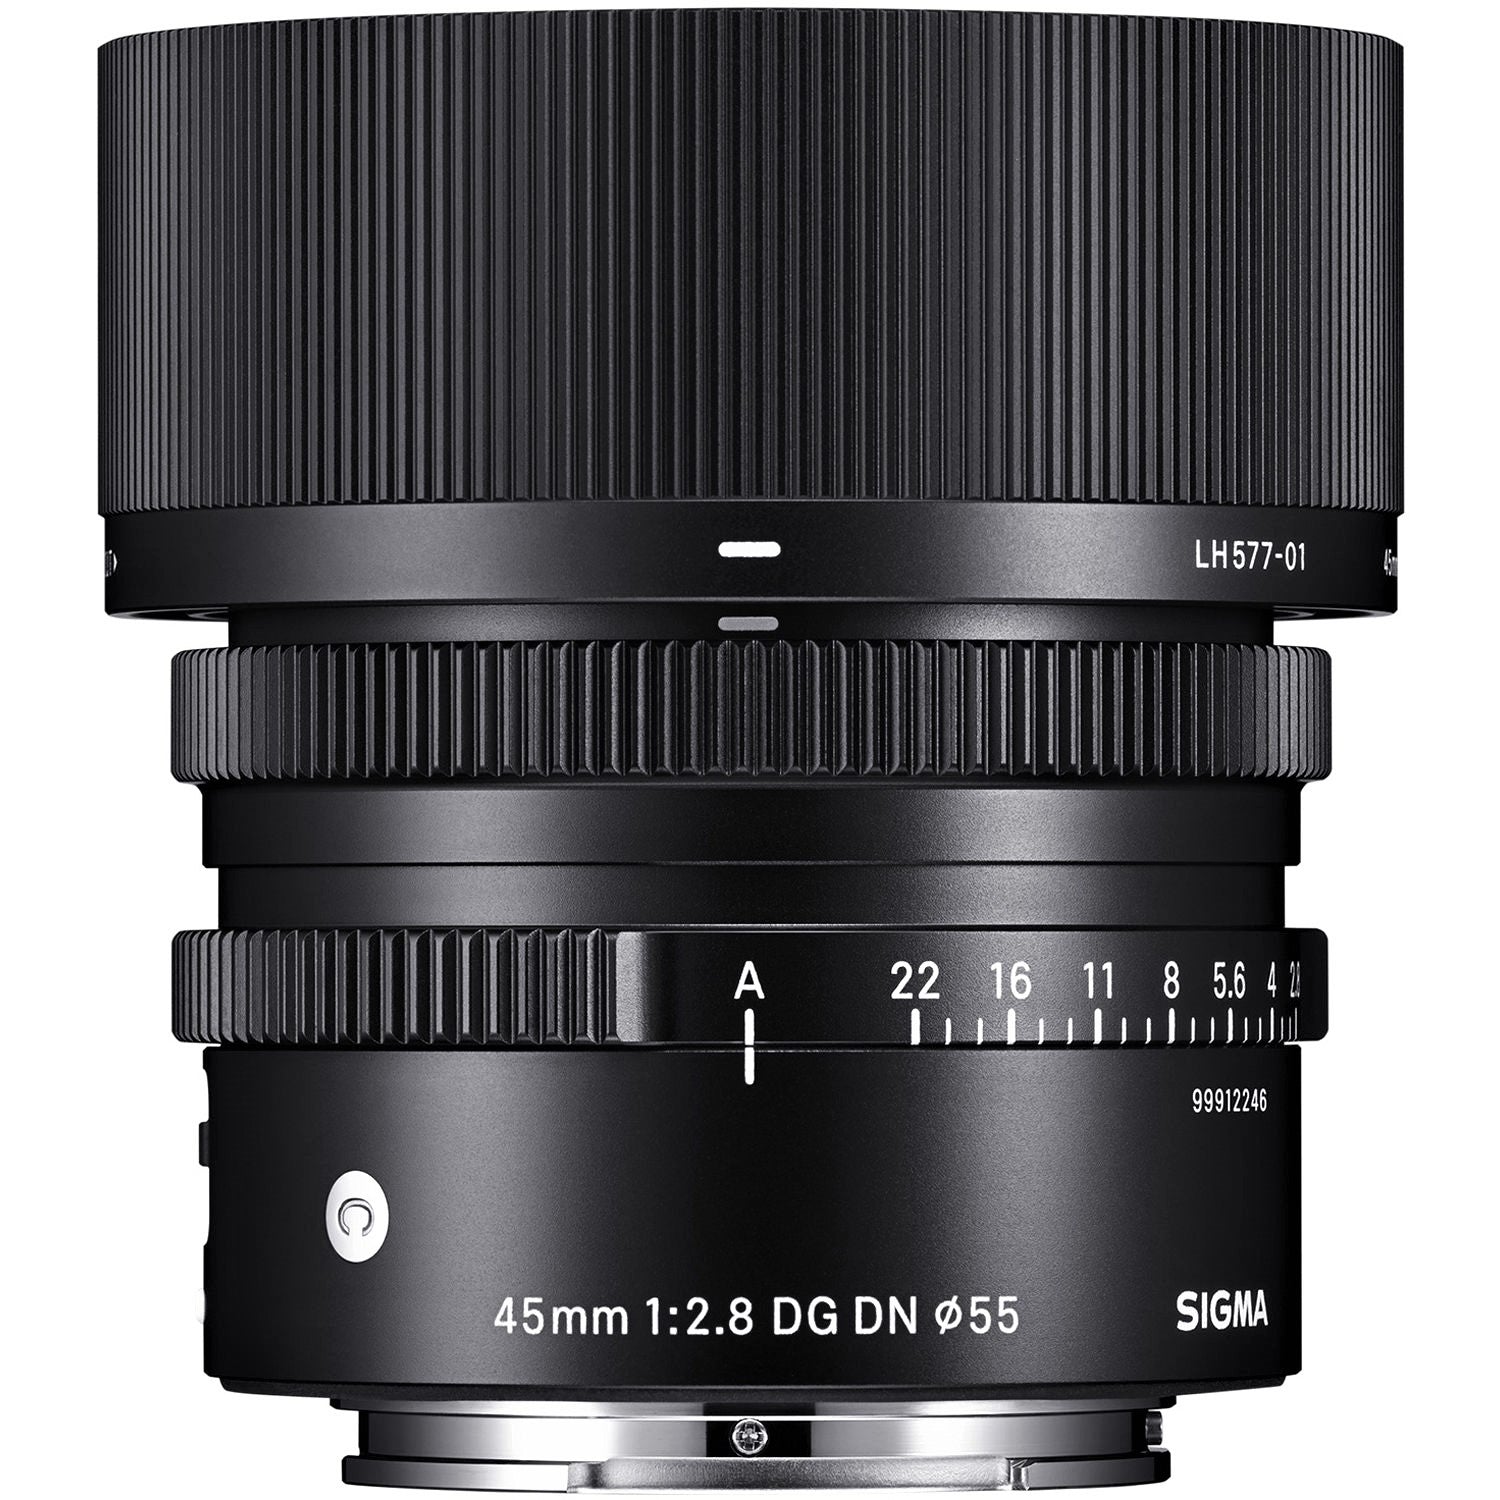 Sigma 45mm F2.8 DG DN Contemporary Lens for Sony E with Attached Lens Hood on the Top